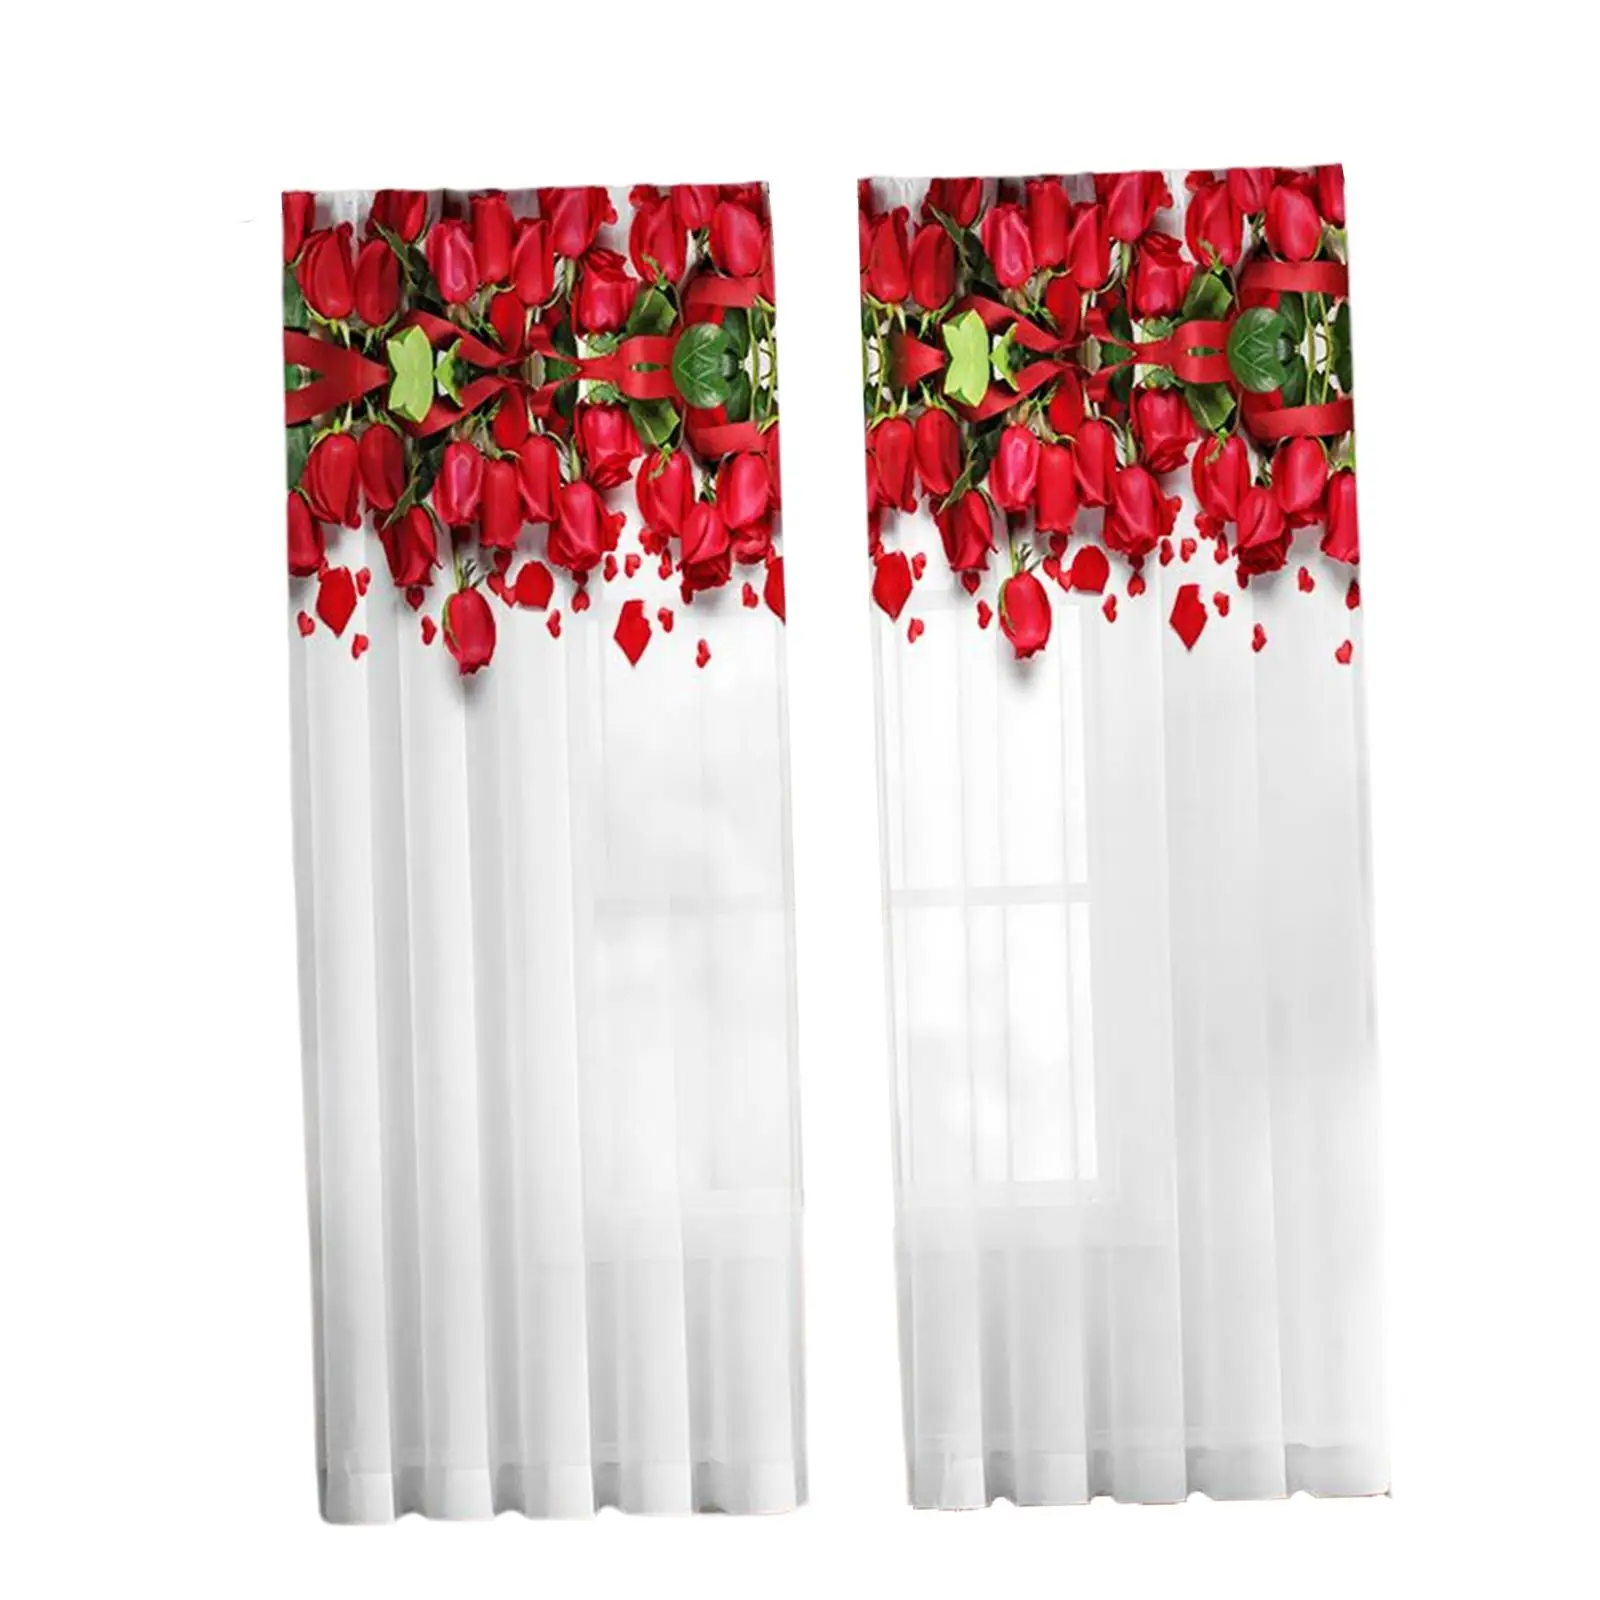 2x Printed Sheer Curtains Rose Flower Curtain Panels Floral White Sheer Curtain for Kids Room Living Room Window Bedroom Kitchen